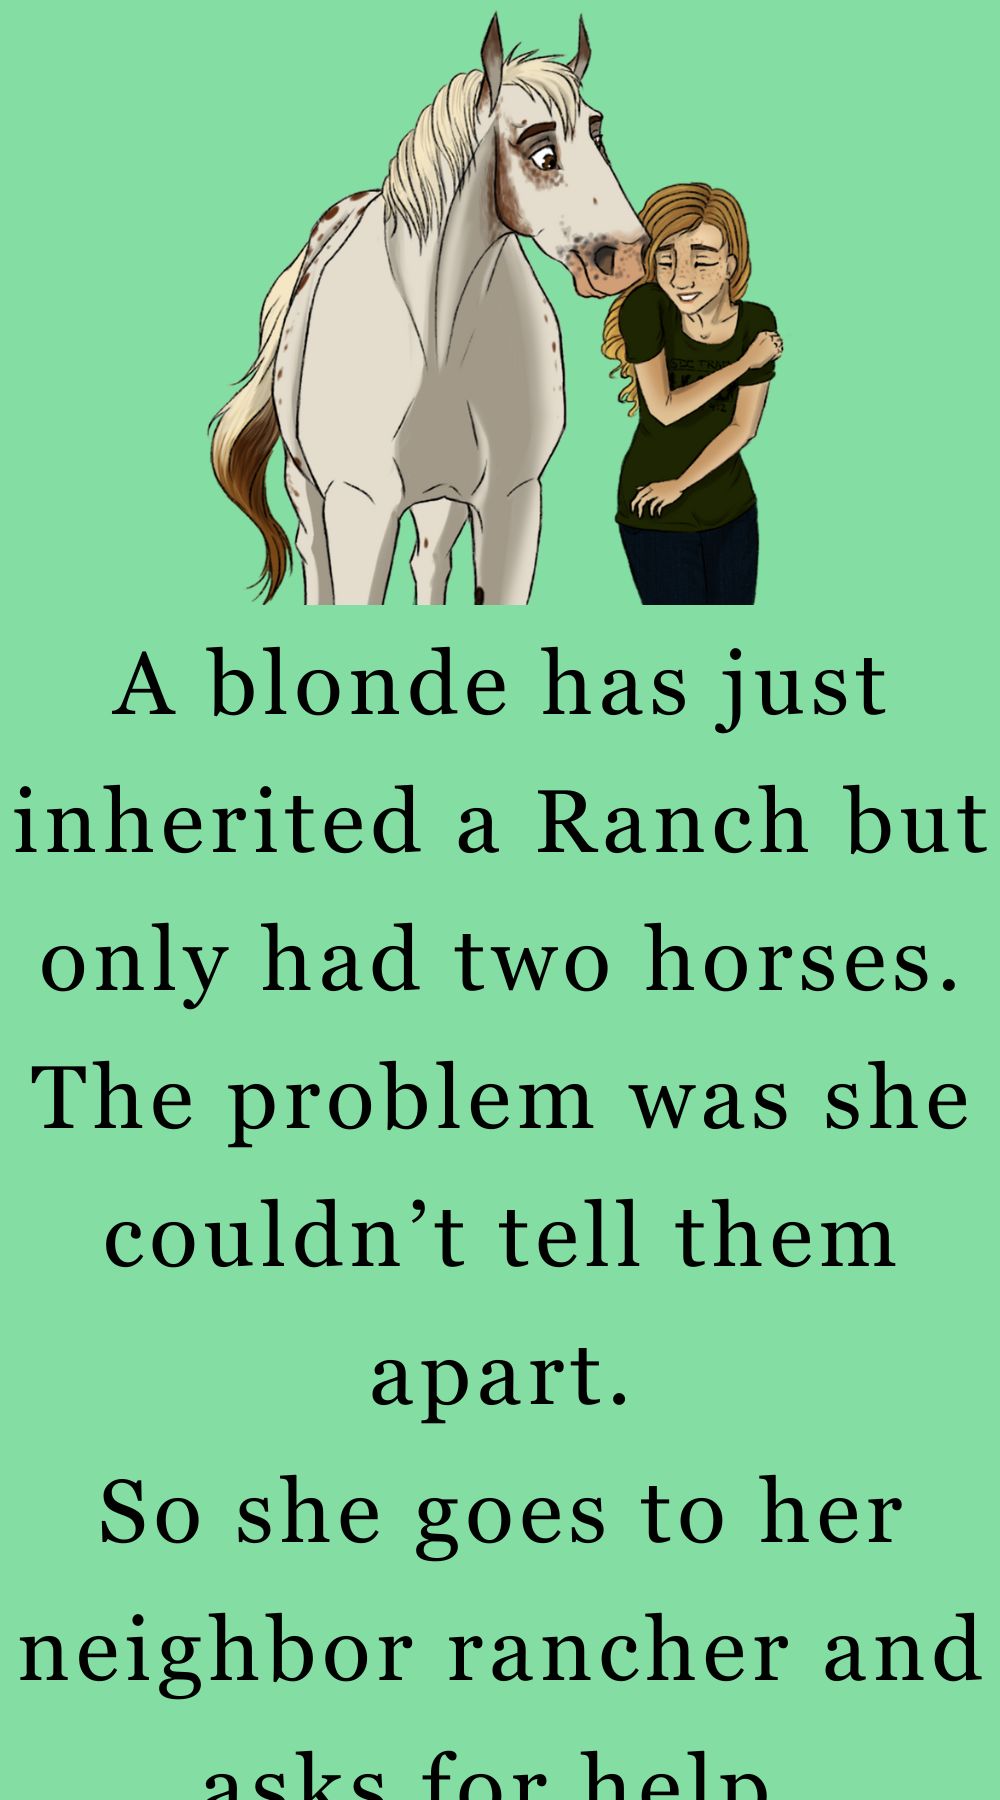 A blonde has just inherited a Ranch but only had two horses